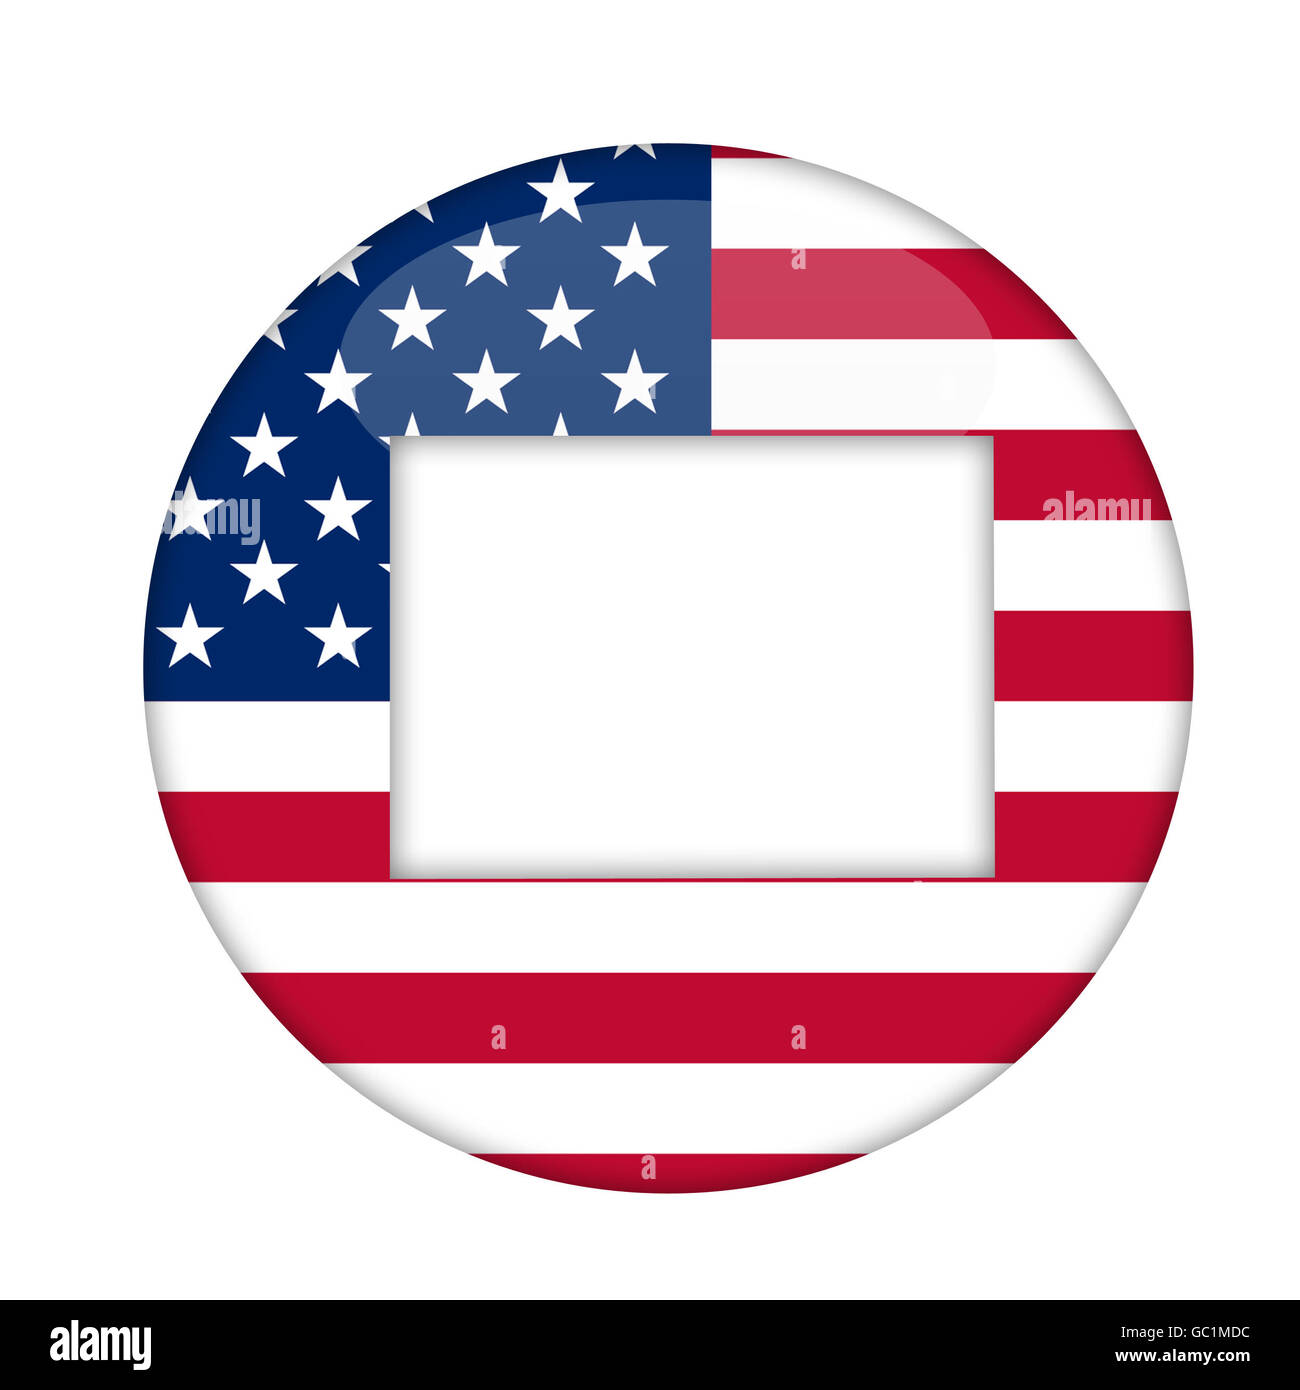 Connecticut state of America badge isolated on a white background. Stock Photo